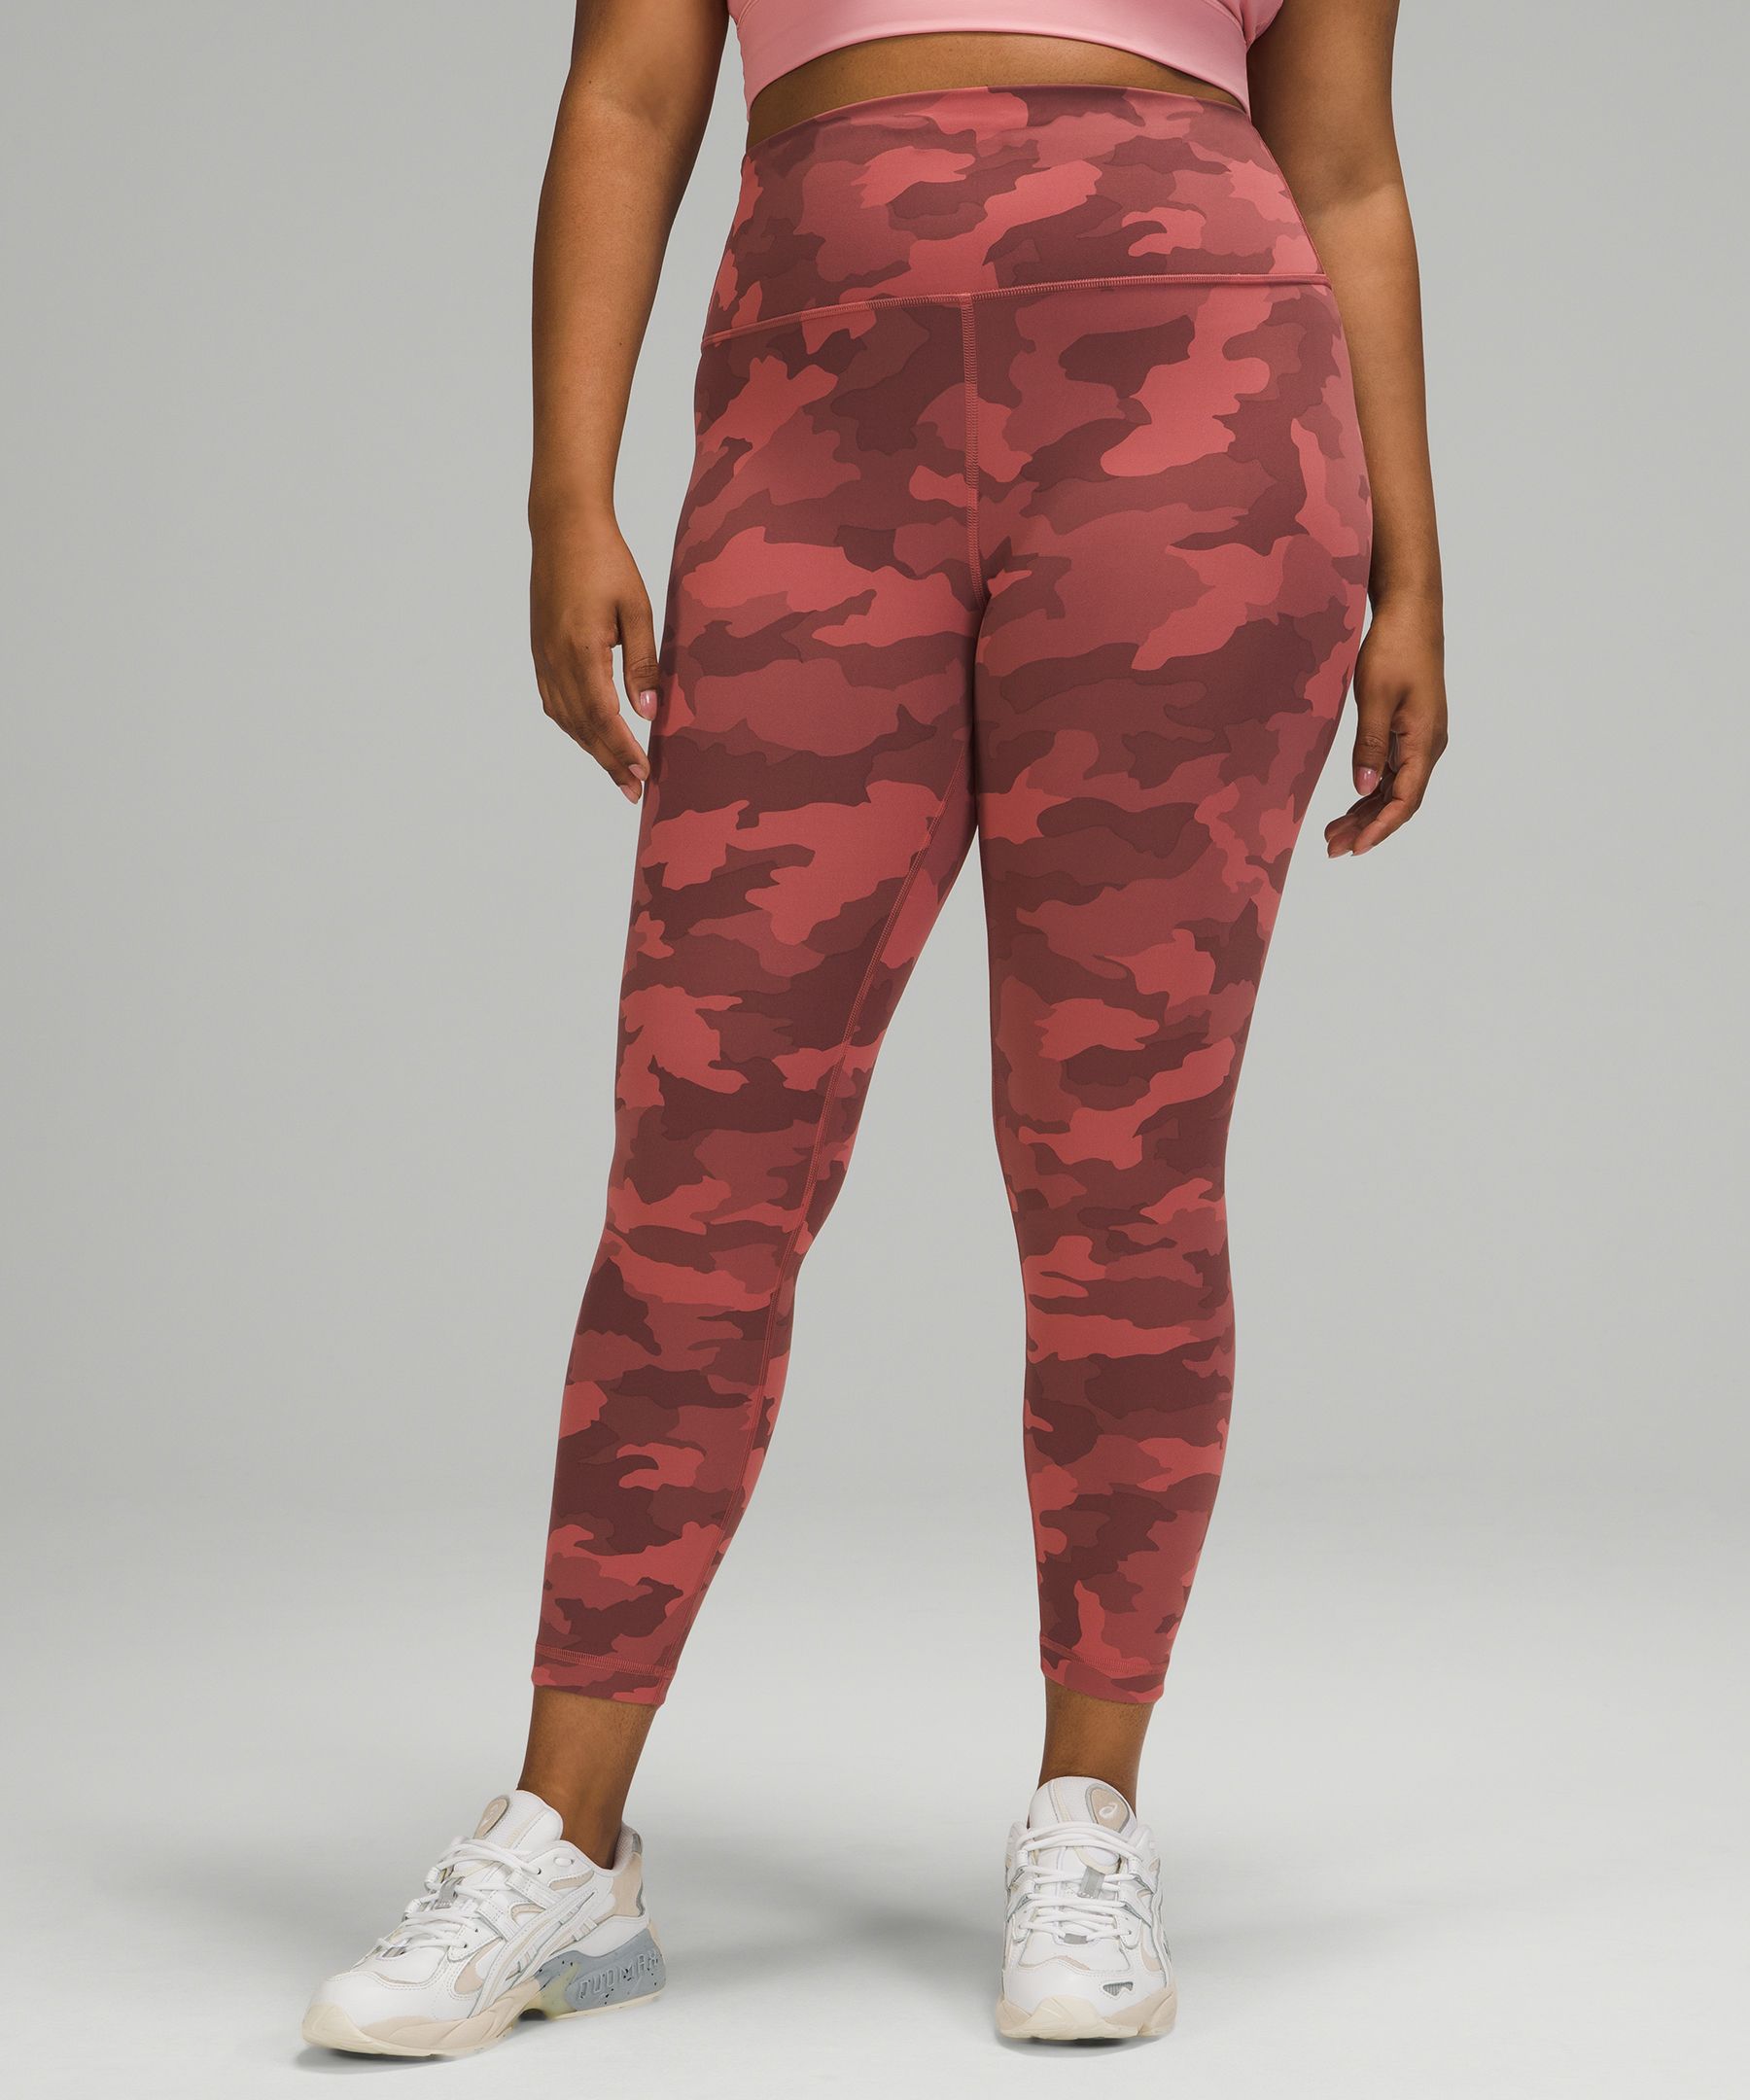 Lululemon Wunder Train High-rise Tight 25 In Printed